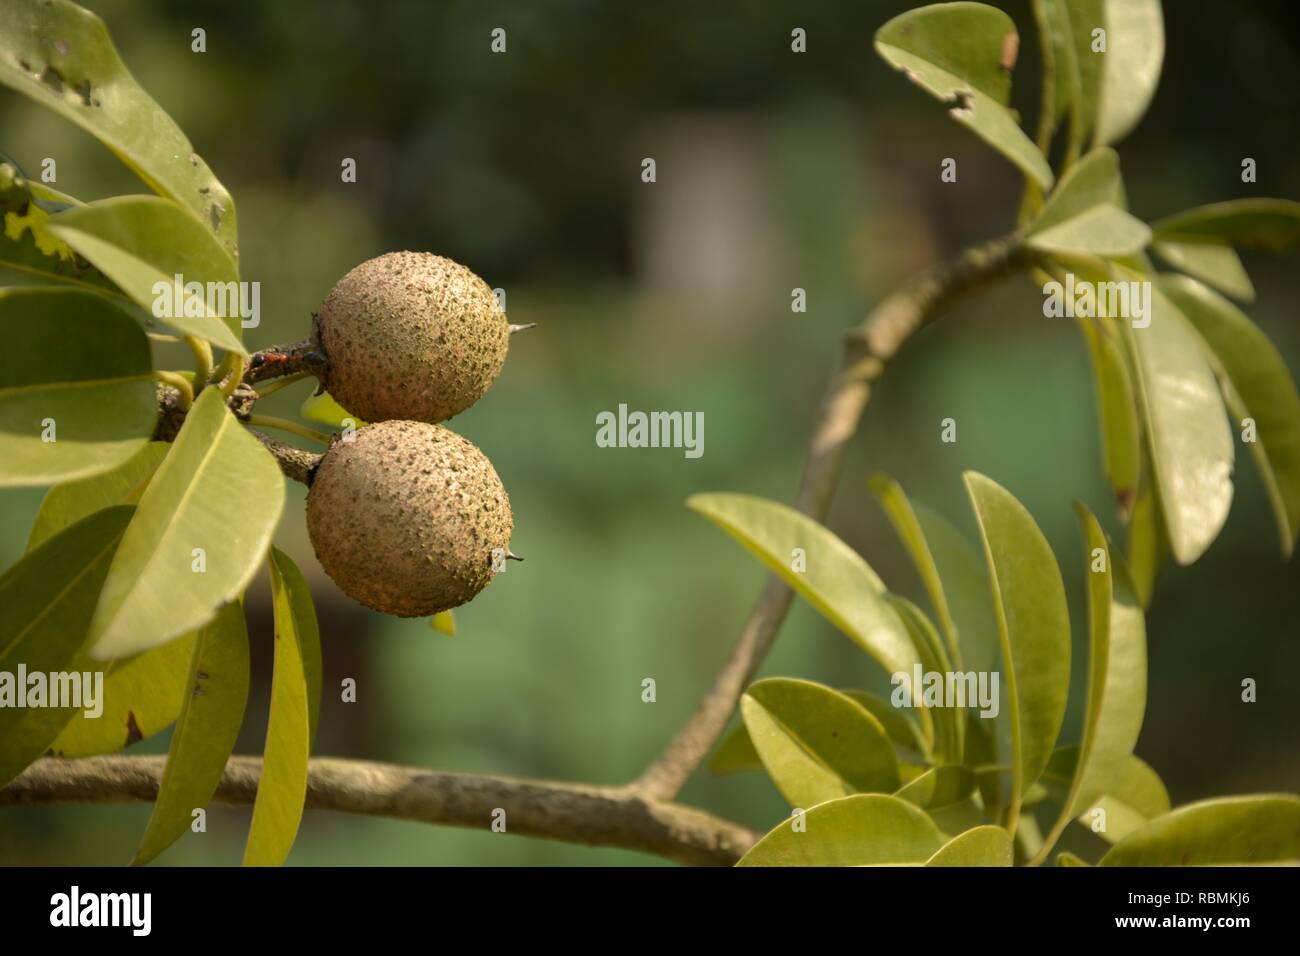 Some beautiful  small Manilkara zapota, commonly known as sapodilla or chikoo with green leaves growing in the plant in garden with blur background Stock Photo